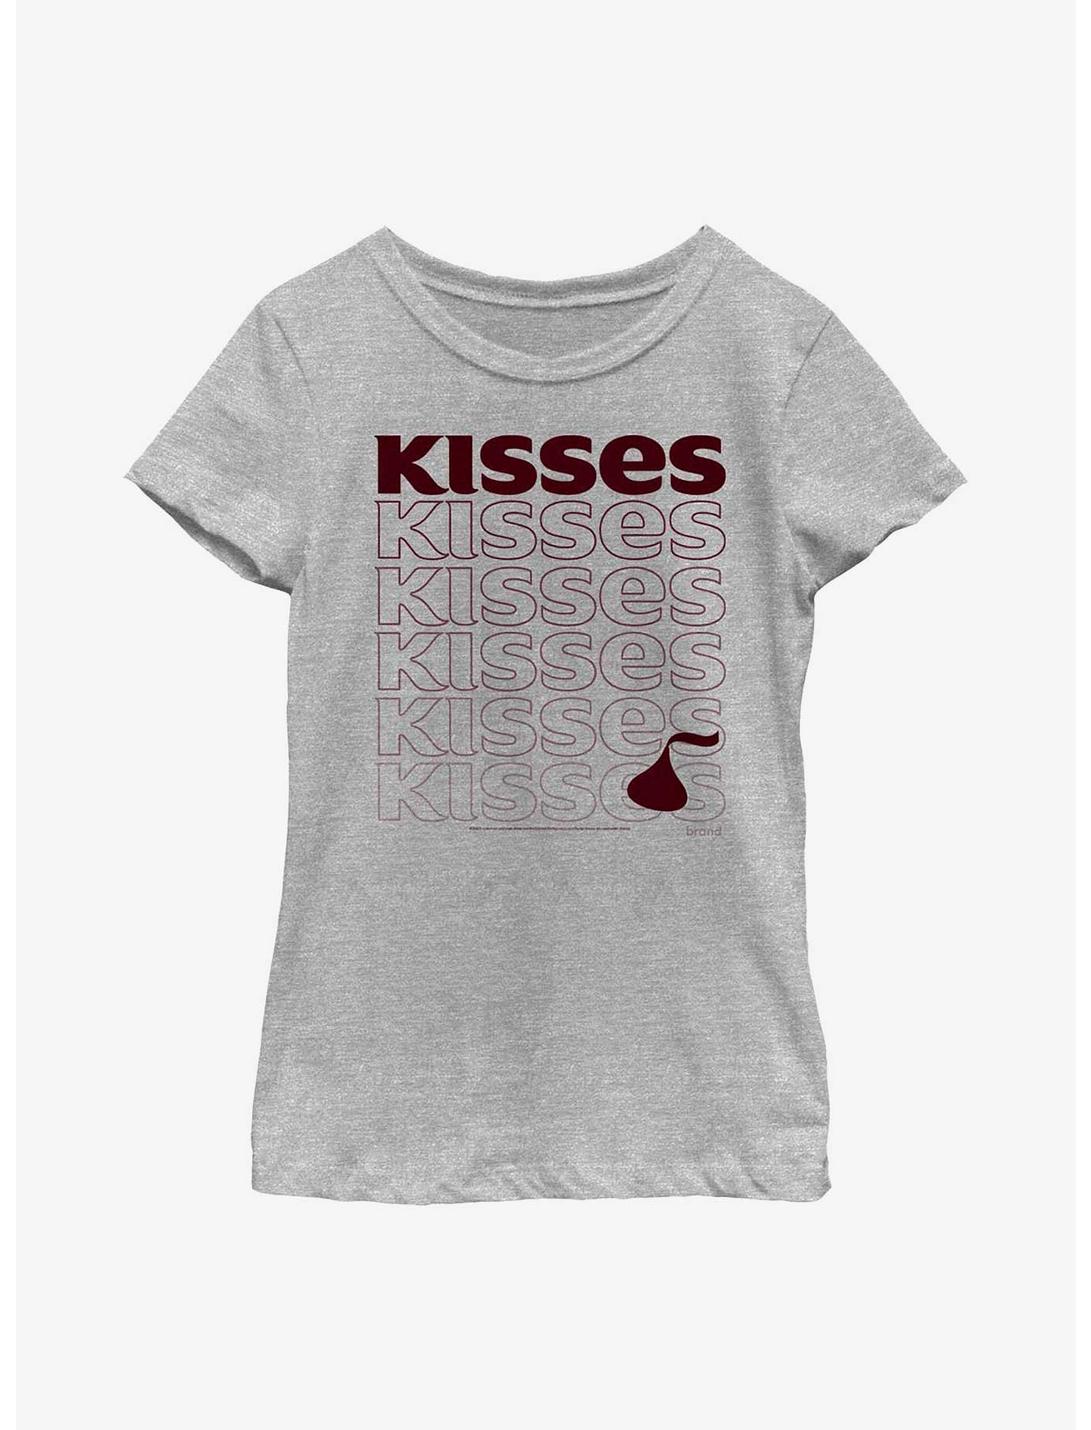 Hershey's Kisses Stacked Kisses Youth Girls T-Shirt, ATH HTR, hi-res